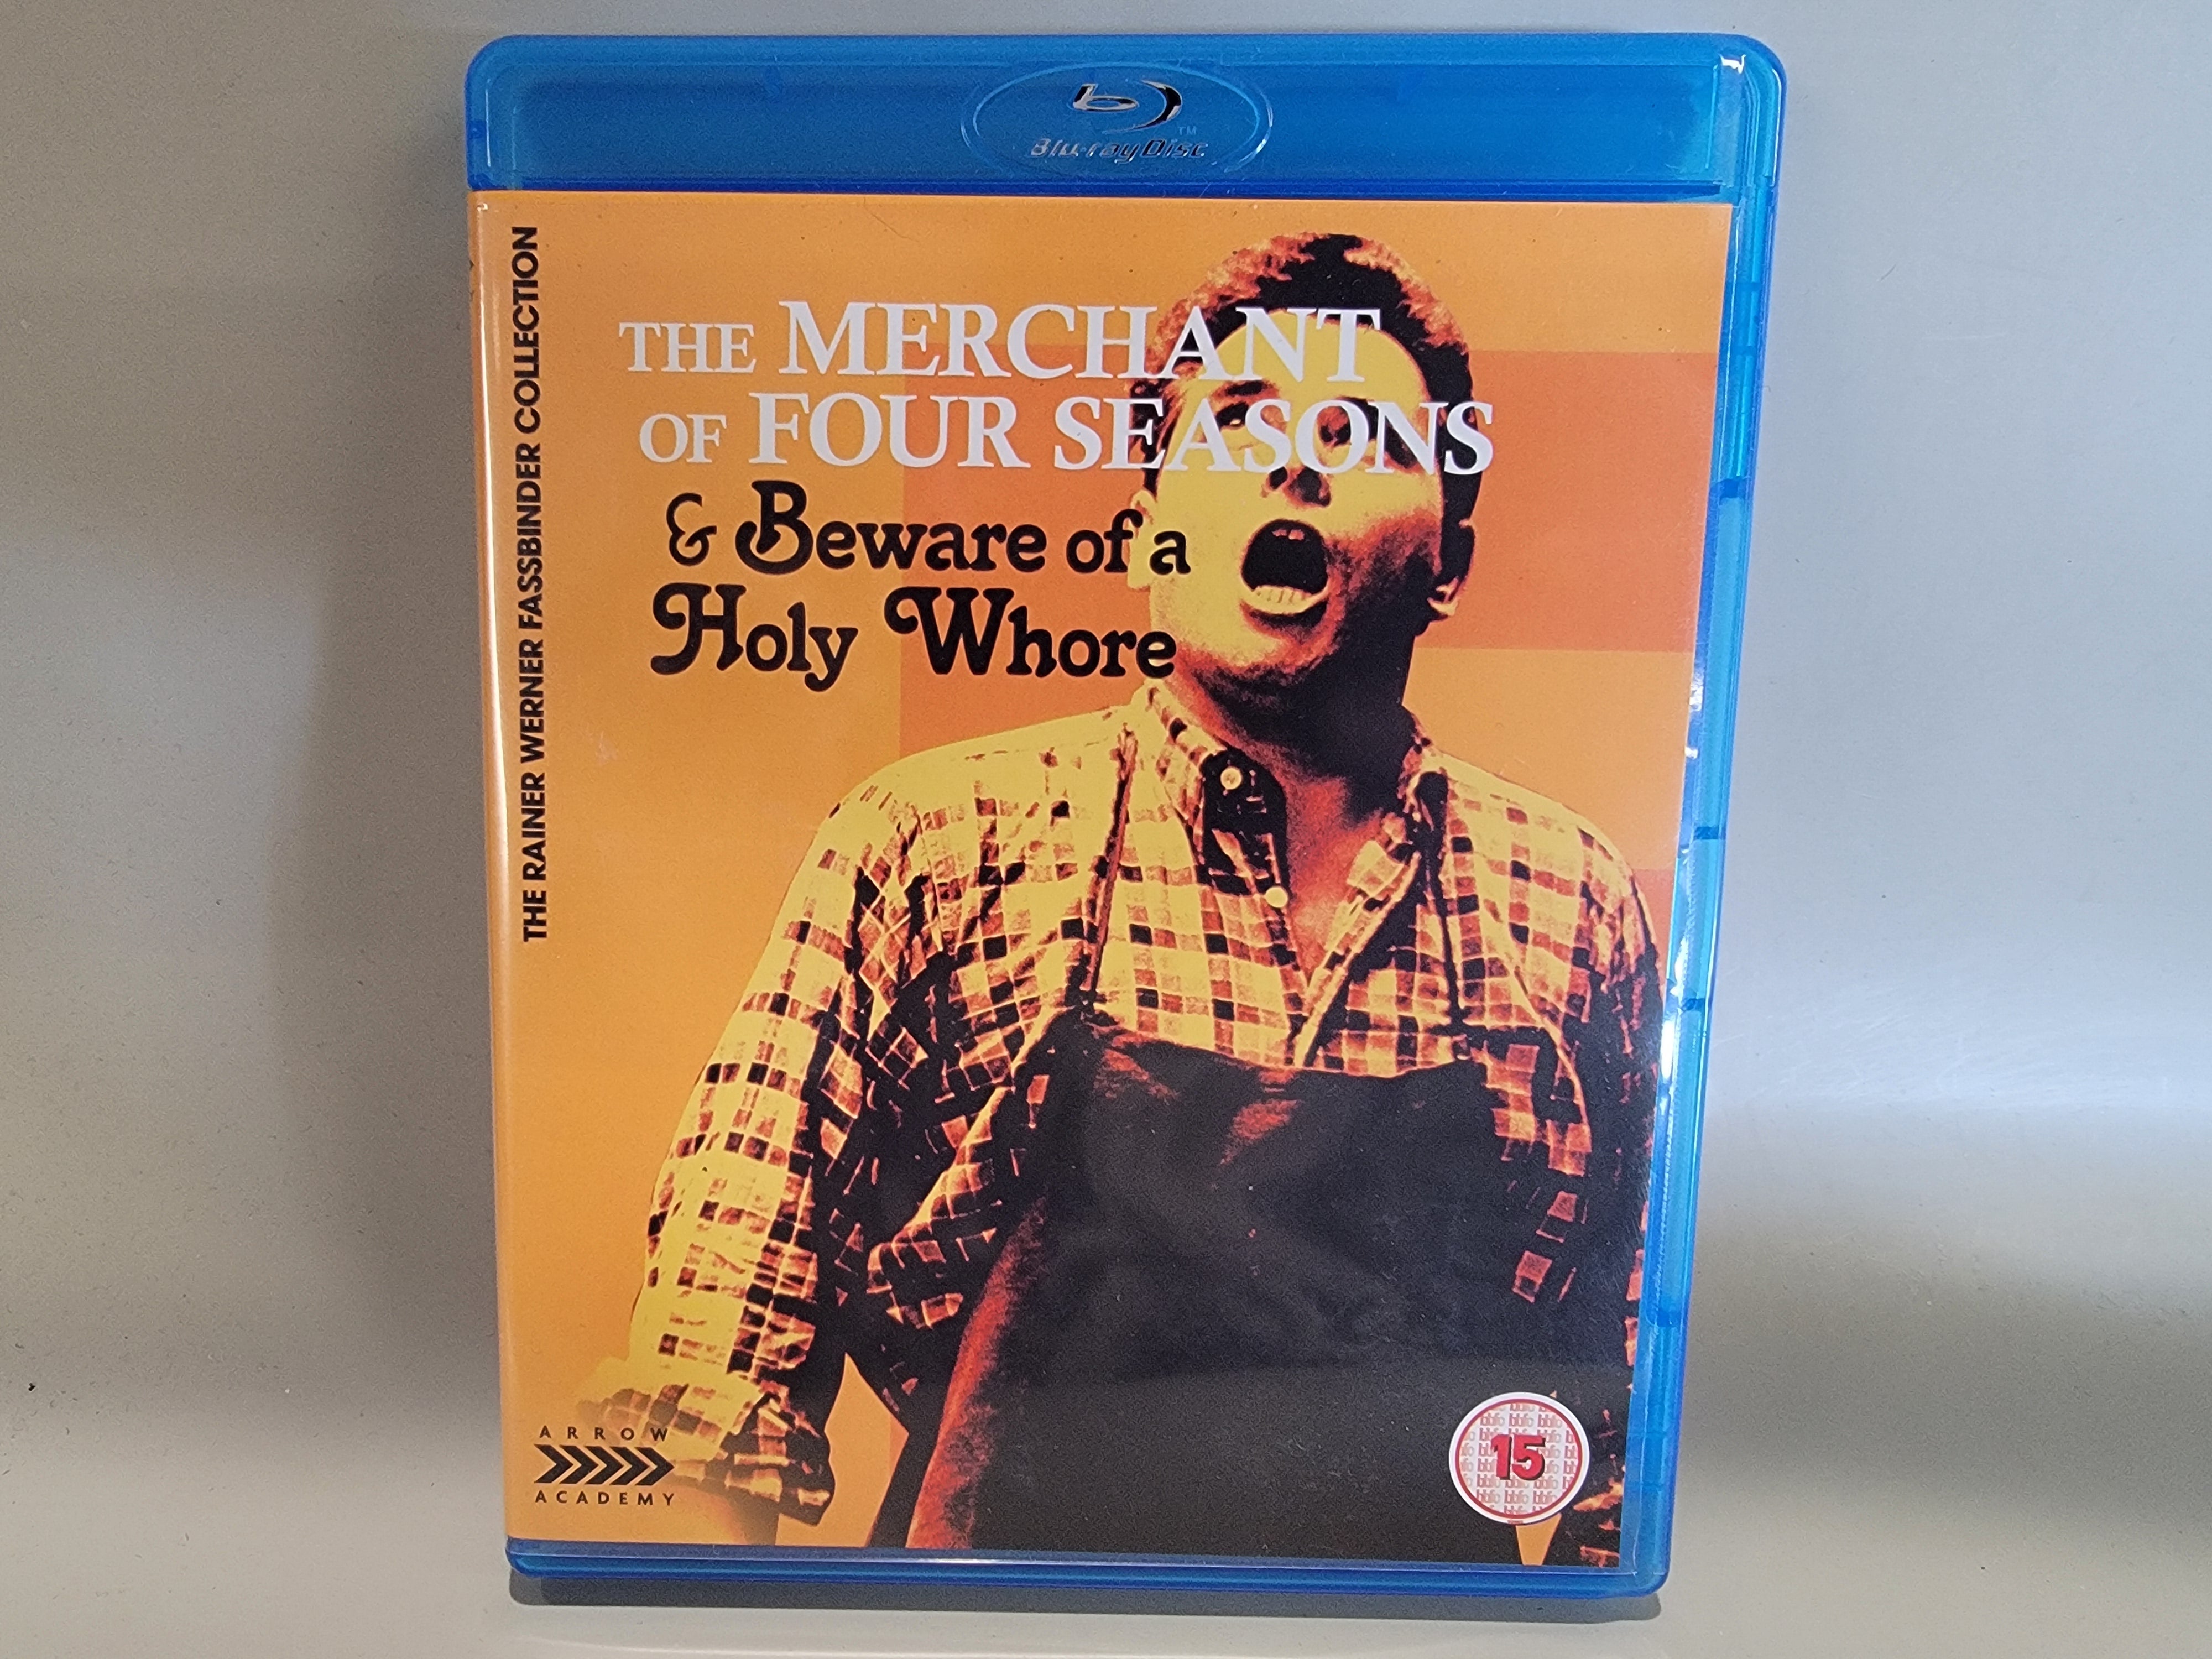 THE MERCHANT OF FOUR SEASONS / BEWARE OF A HOLY WHORE (REGION B IMPORT) BLU-RAY [USED]